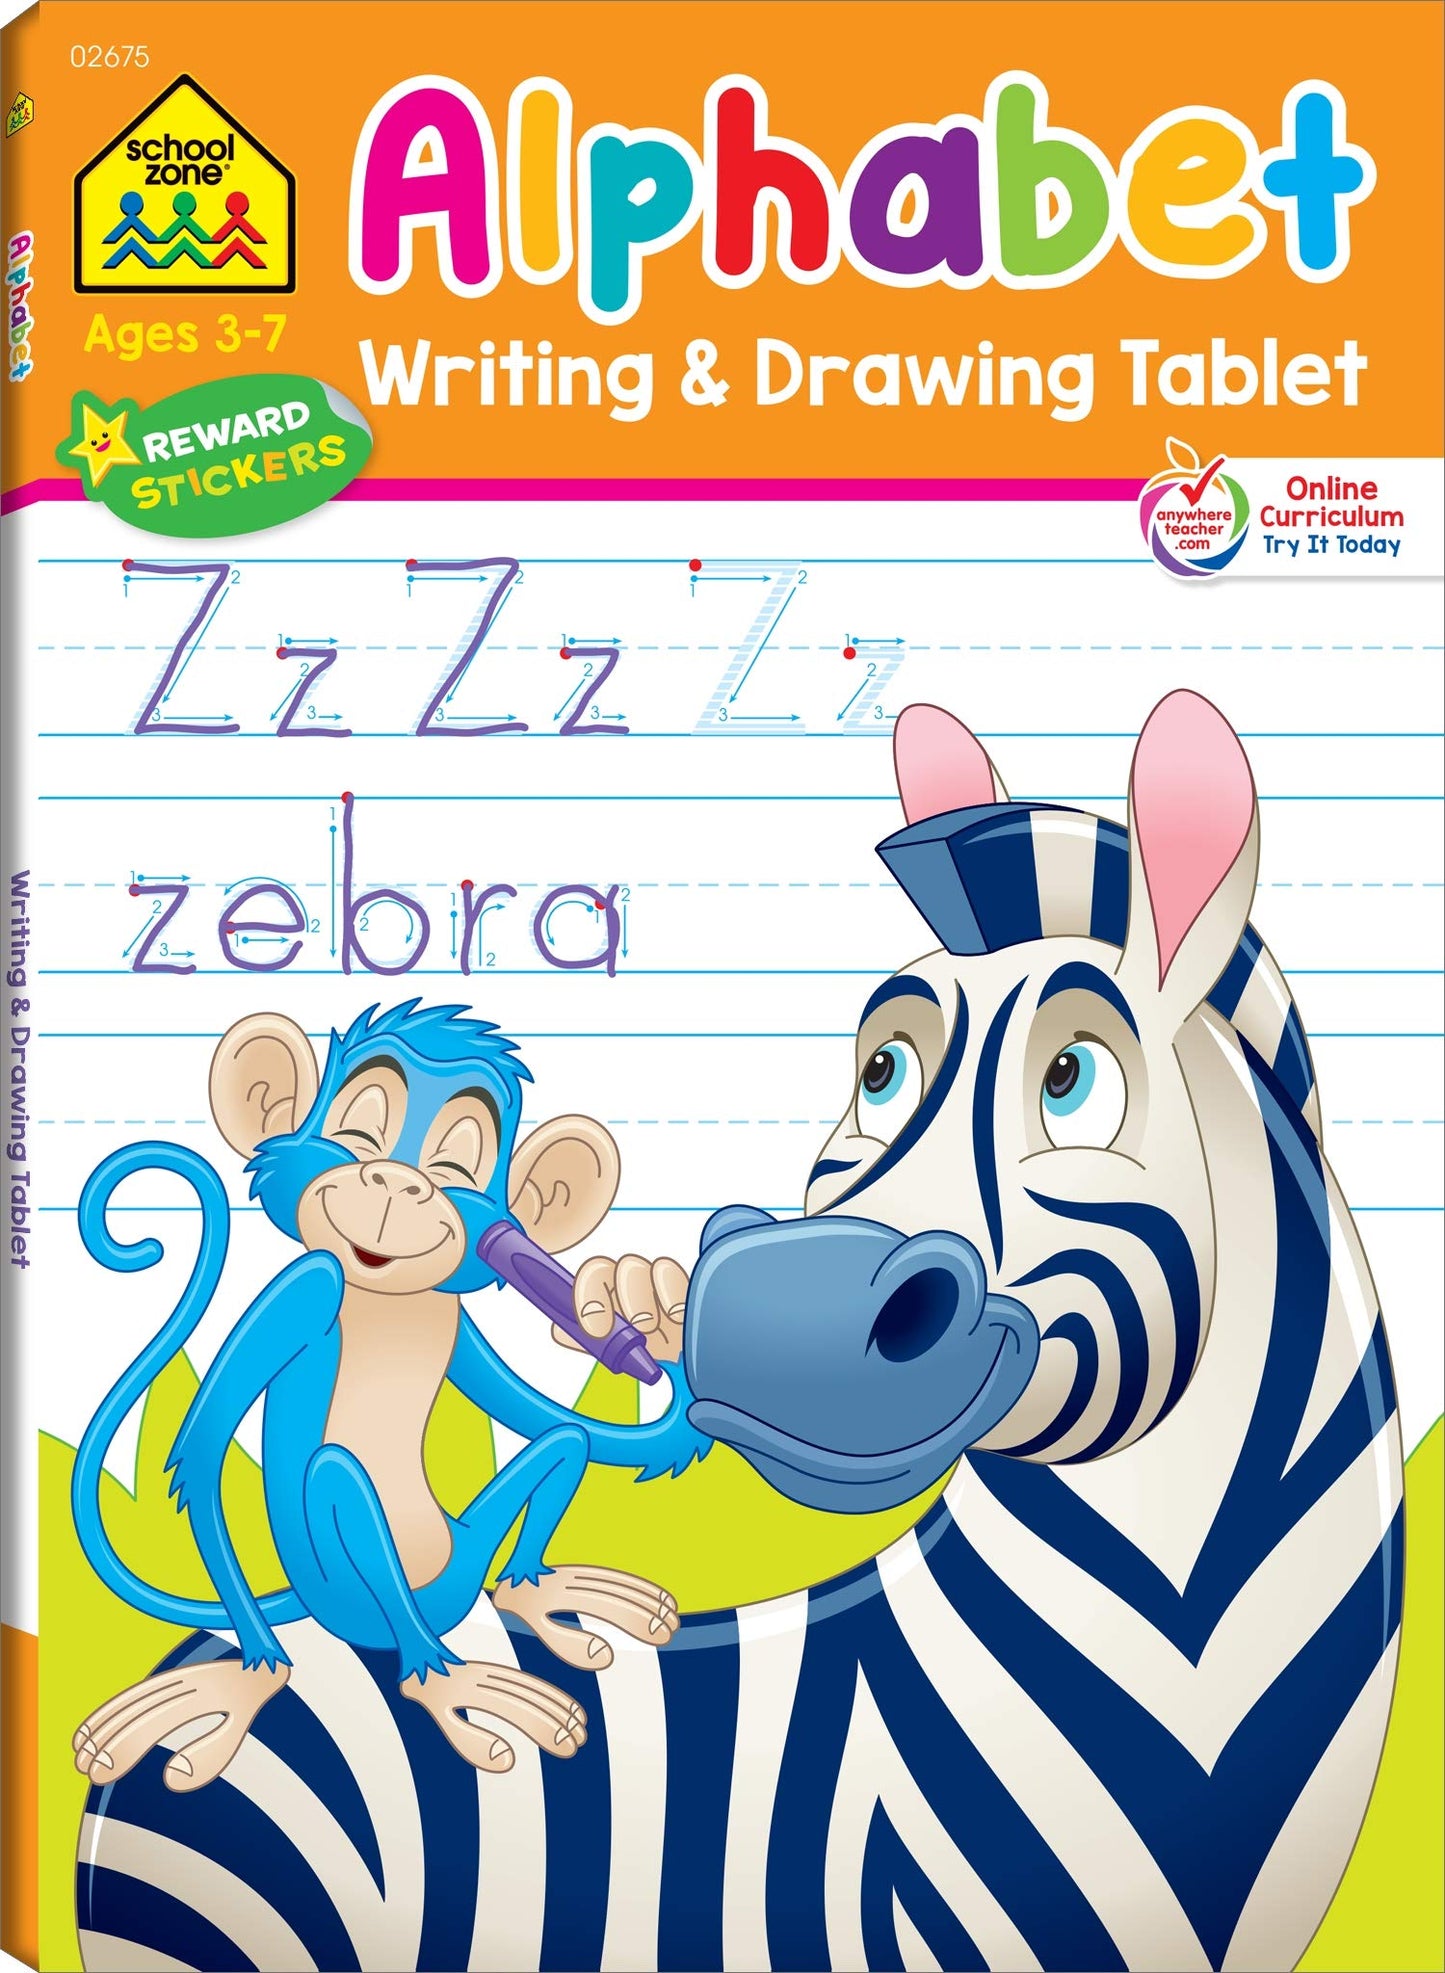 School Zone - Alphabet Writing & Drawing Tablet Workbook - 96 Pages, Ages 3 to 7, Preschool, Kindergarten, 1st Grade, Letters, ABCs, Printing